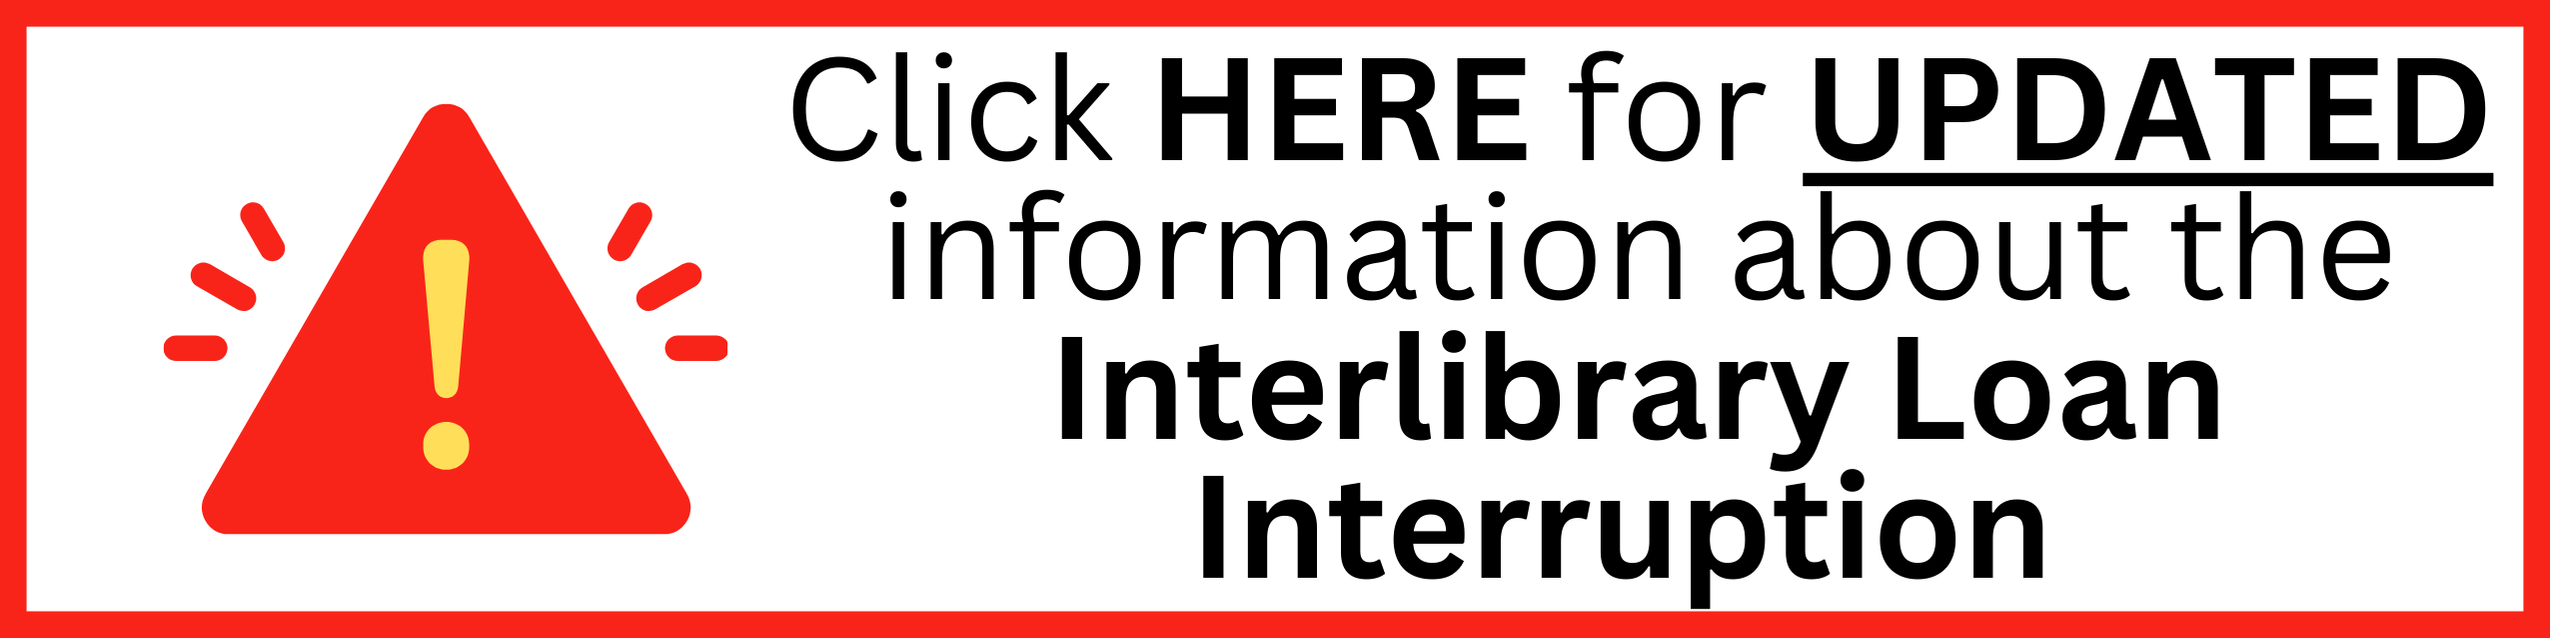 Click here for UPDATED information about the Interlibrary Loan Interruption